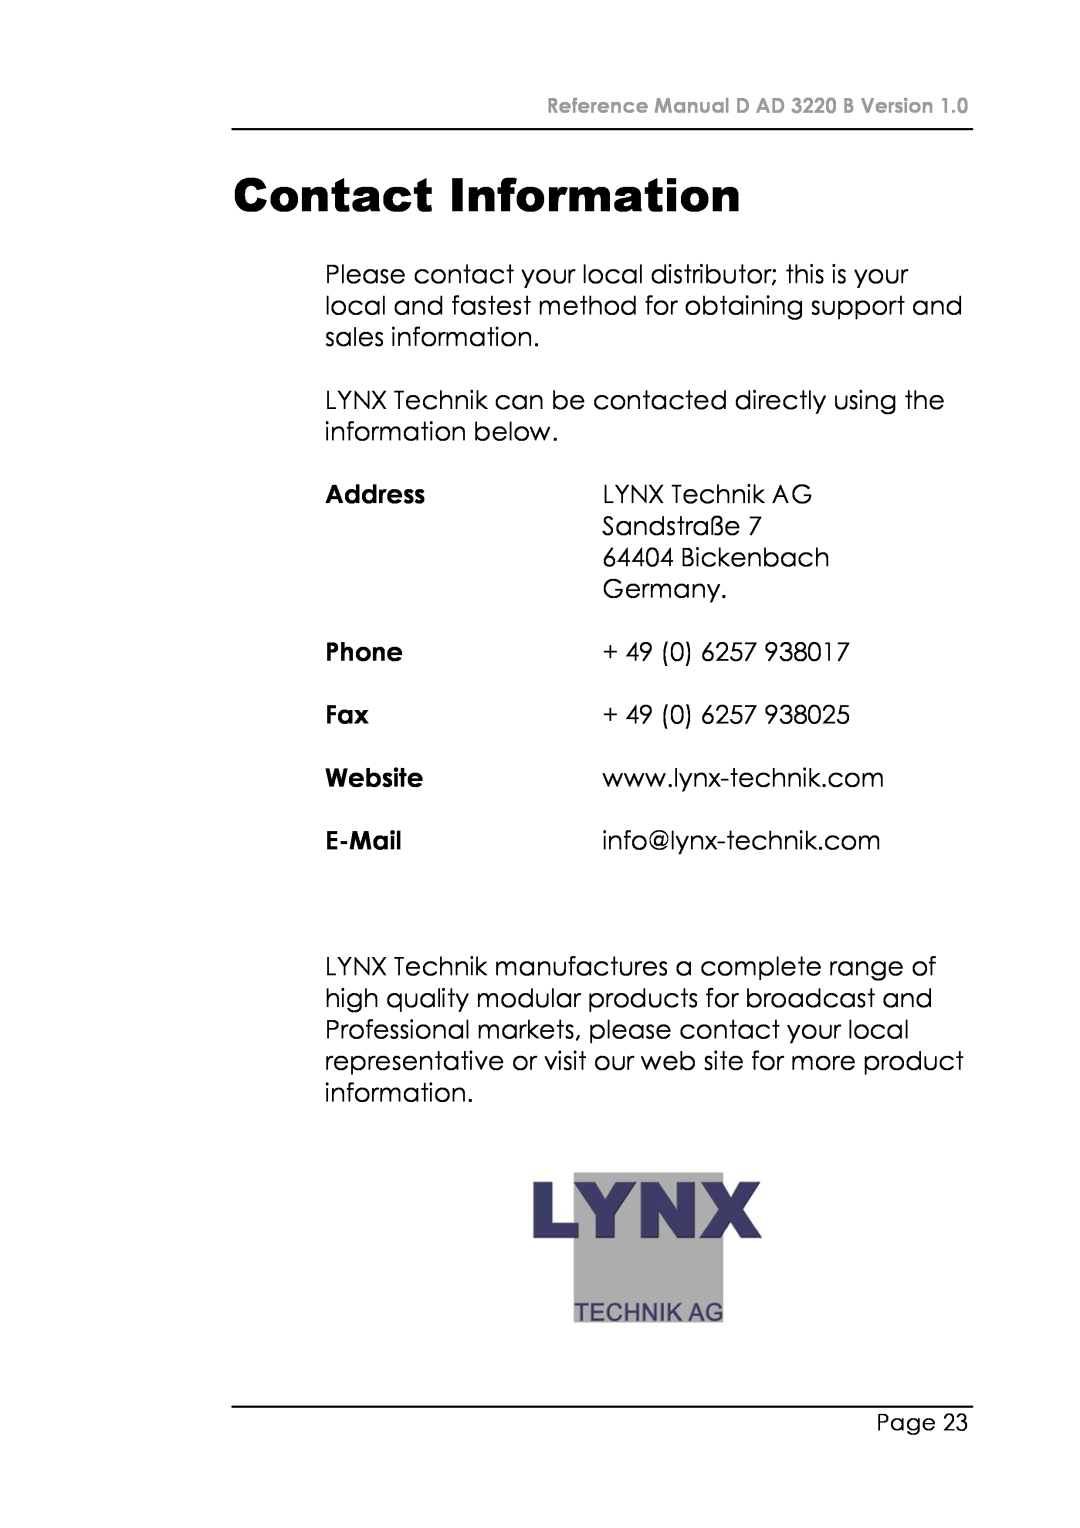 Lynx D AD 3220 B manual Contact Information, Address, Phone, Website, E-Mail 